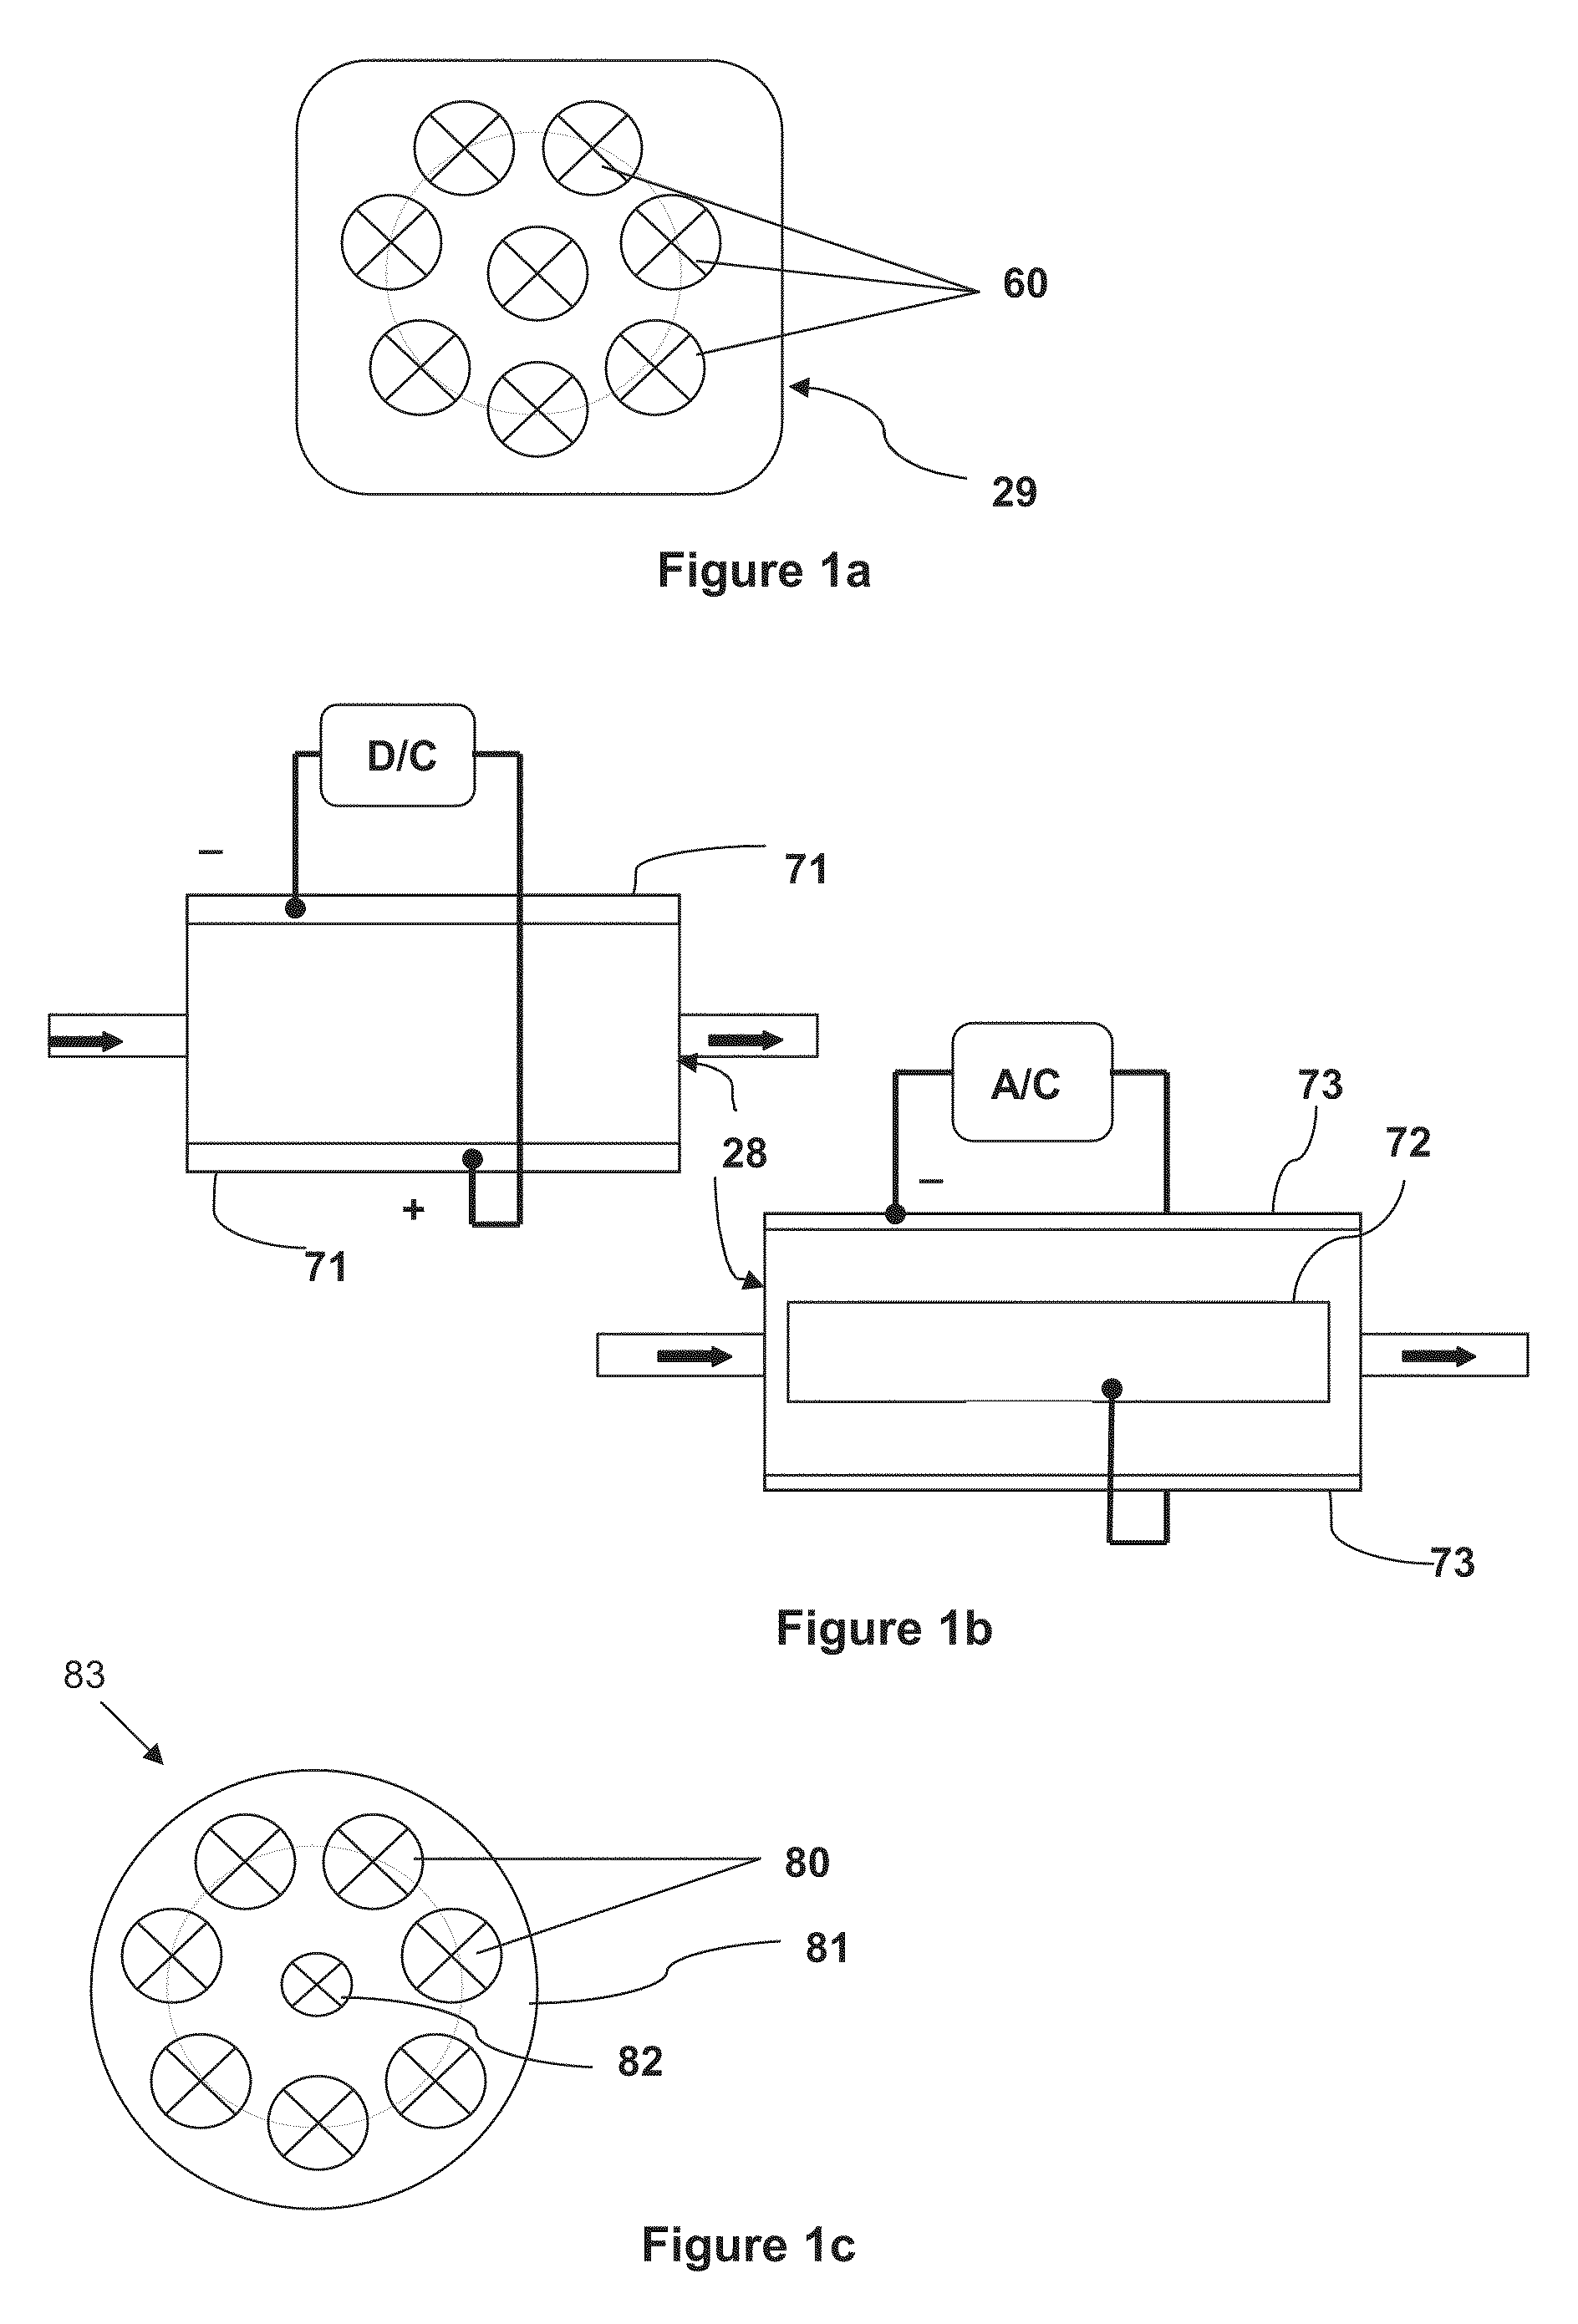 Aqueous treatment apparatus utilizing precursor materials and ultrasonics to generate customized oxidation-reduction-reactant chemistry environments in electrochemical cells and/or similar devices